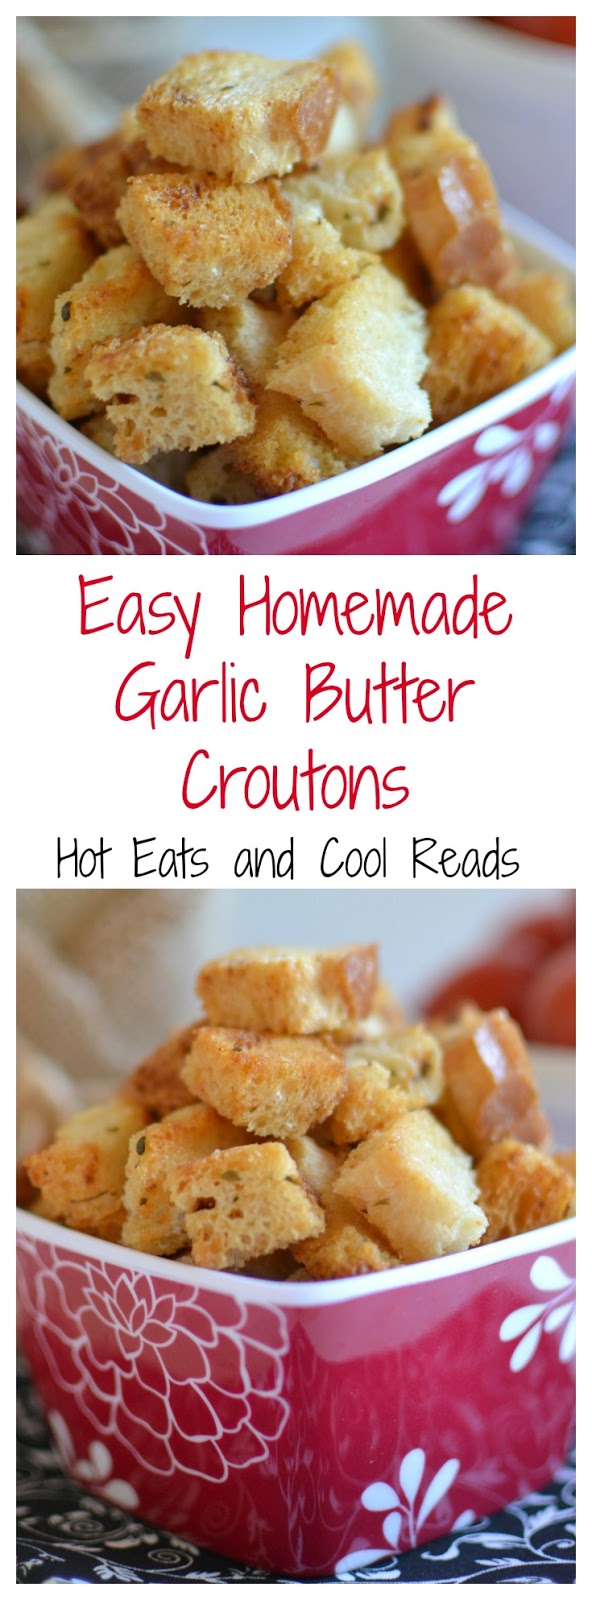 A delicious and inexpensive way to make your own croutons! Use day old bread, buns or any other bread you have on hand! Great on salad, soup or even as a snack! Easy Homemade Garlic Butter Croutons Recipe from Hot Eats and Cool Reads!